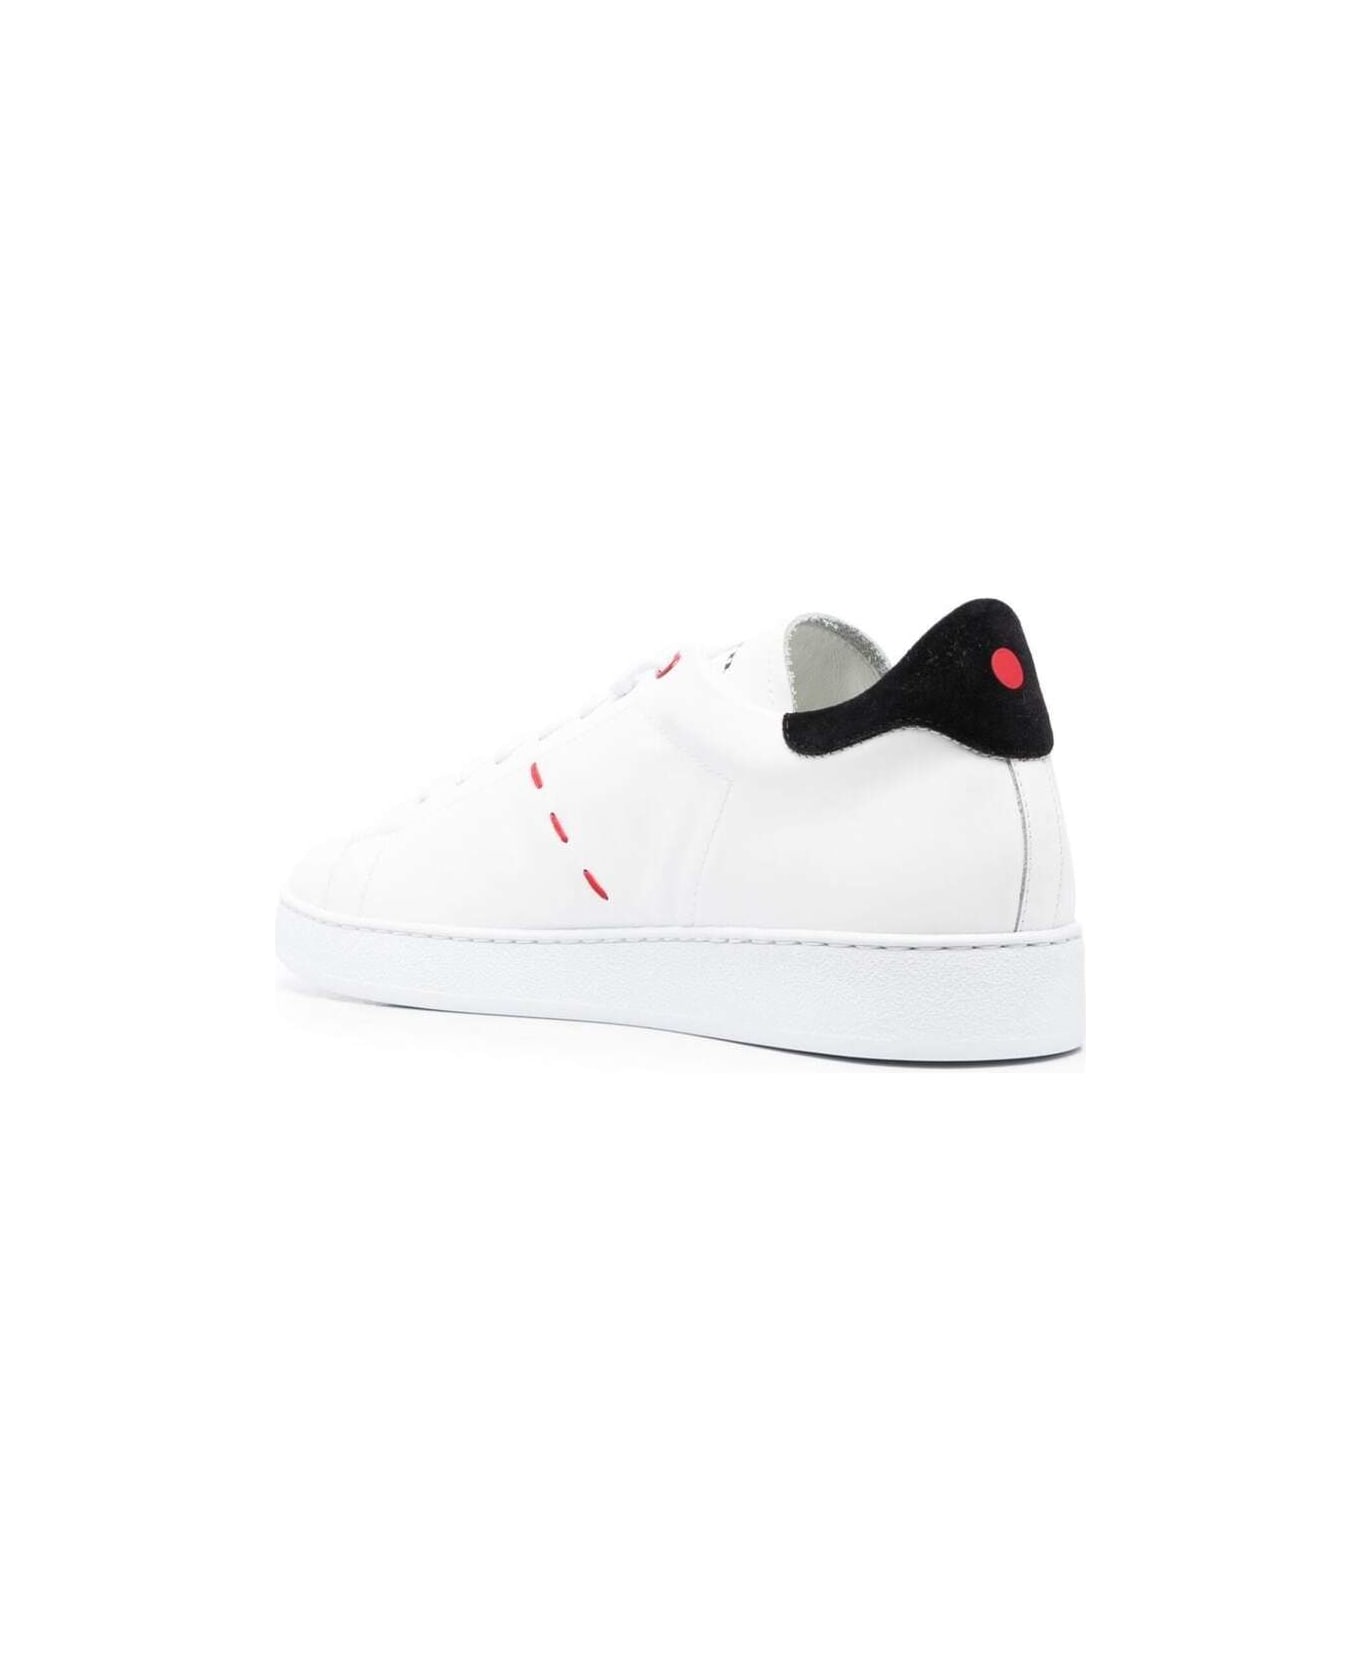 Kiton Black And White Sneakers With Logo And Contrasting Stitching In Leather Man - White